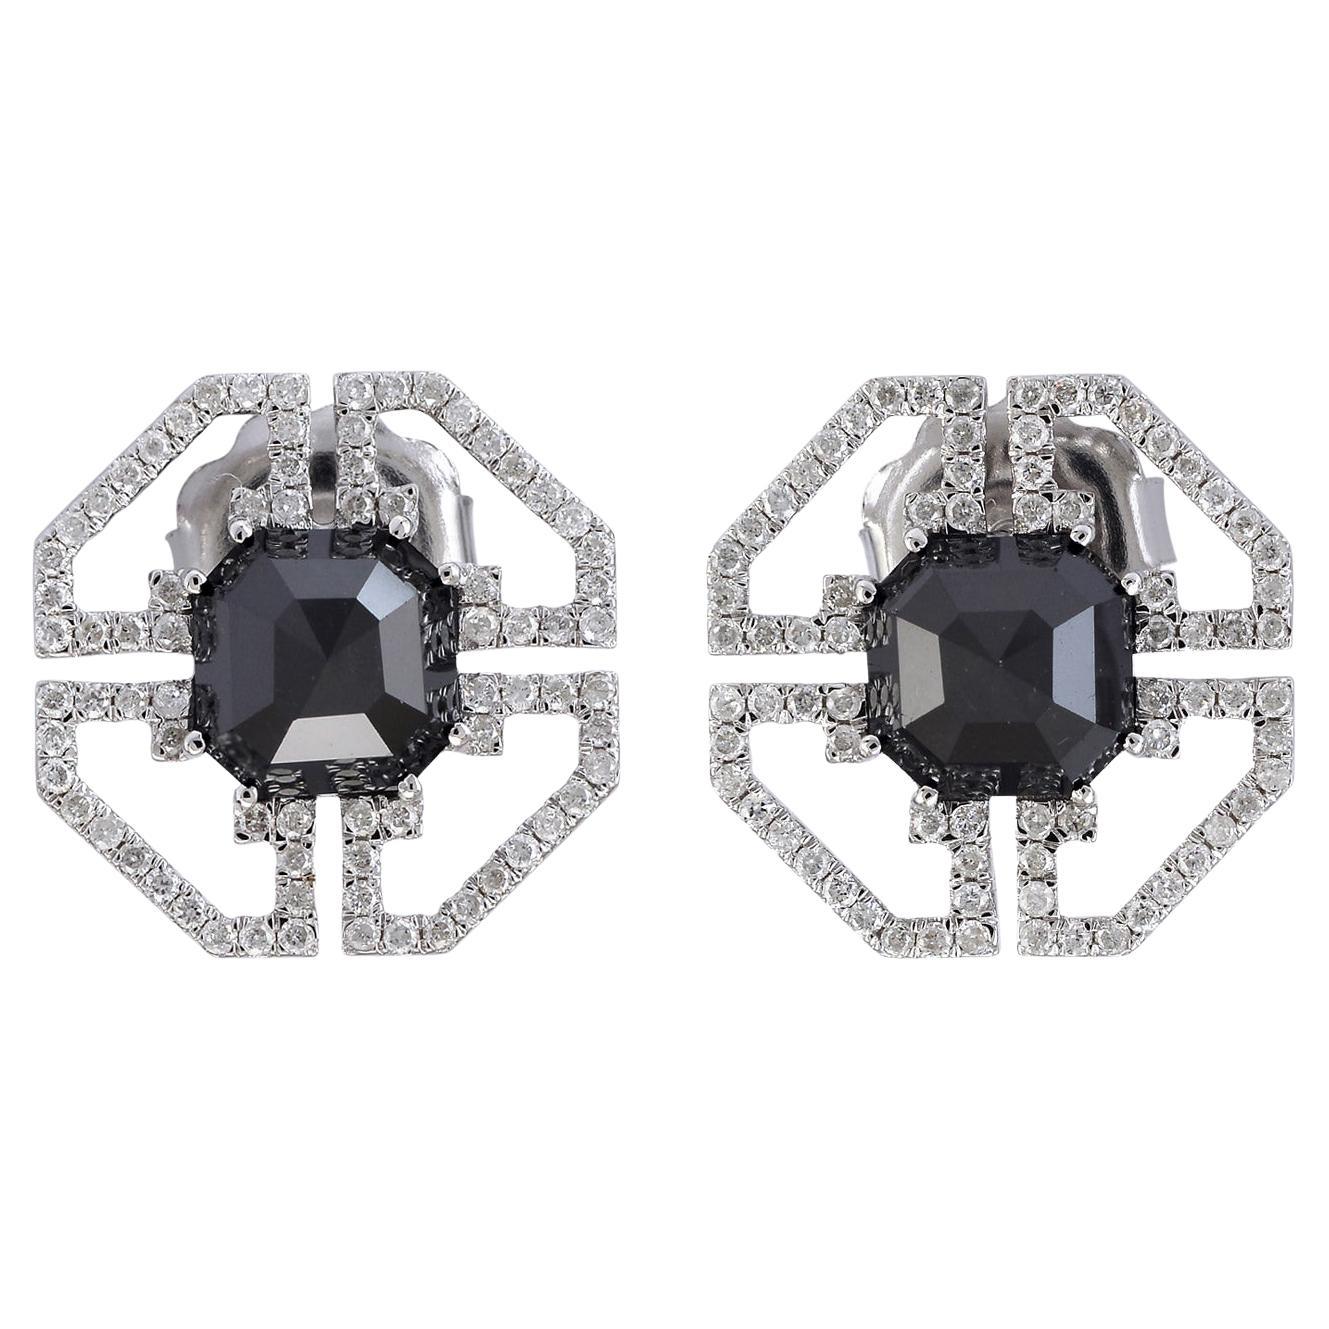 Hexagon Shaped Studs With Center Black Diamond Surrounded by White Diamonds